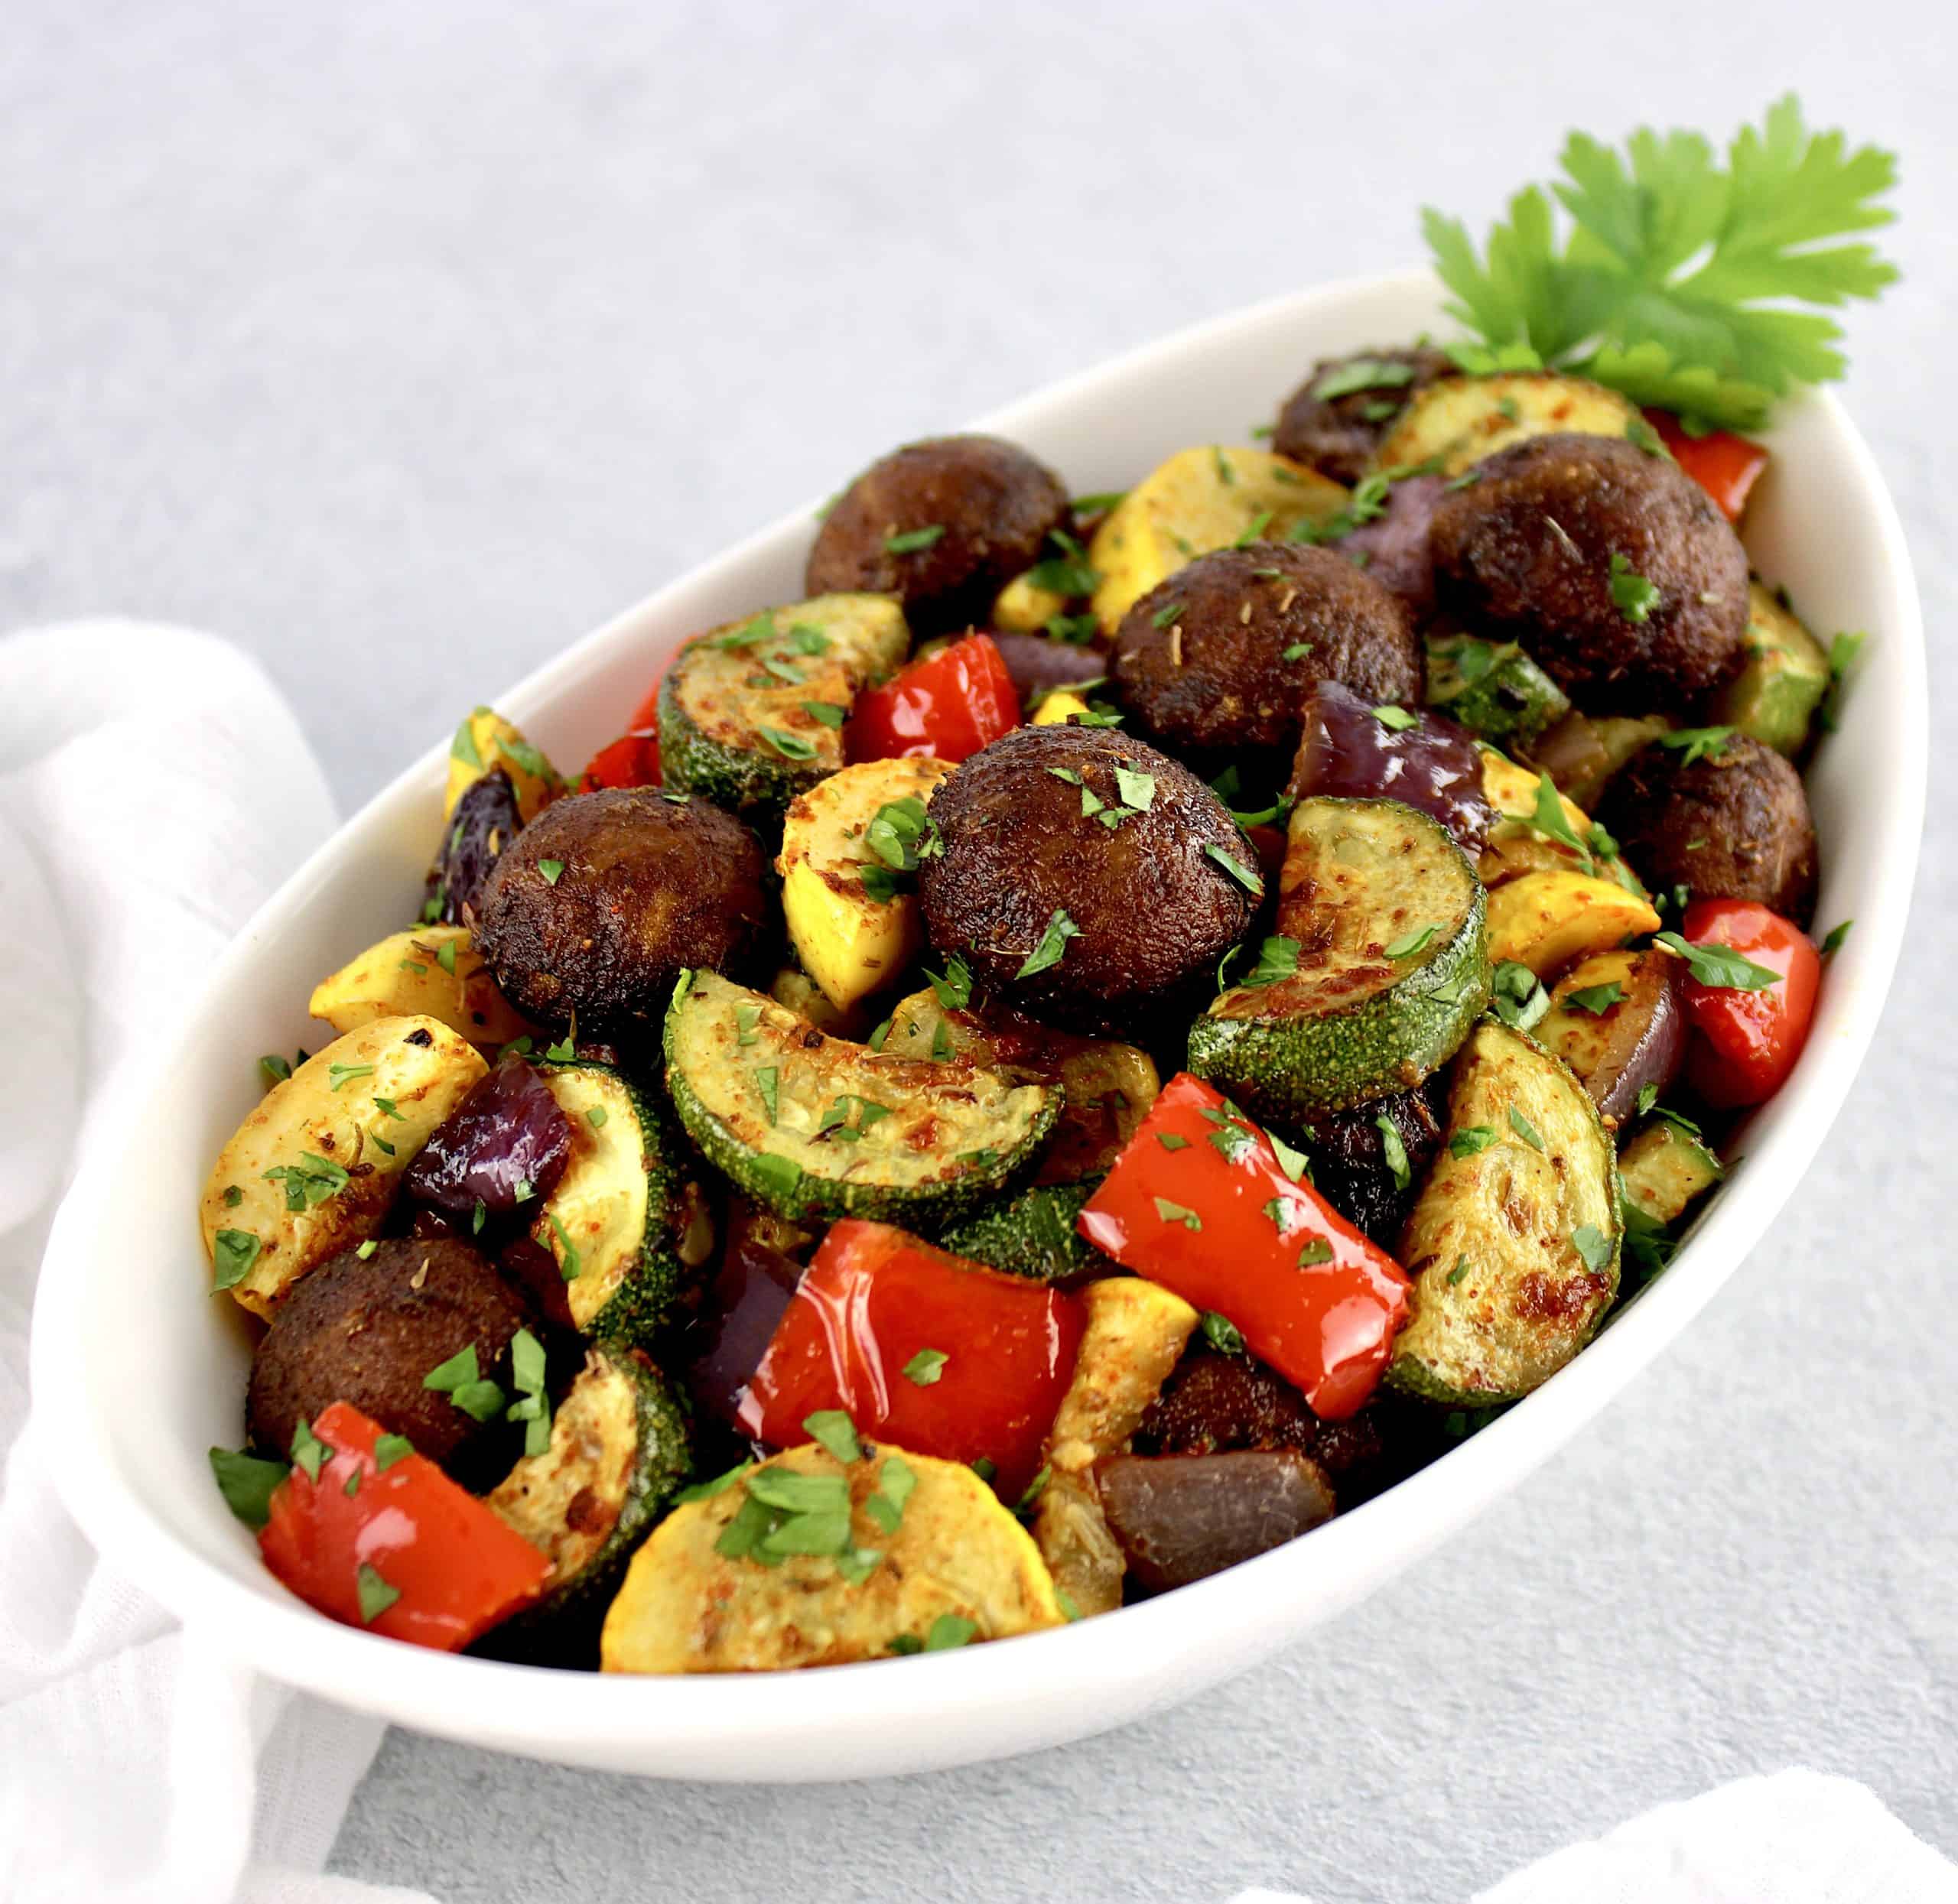 Oven Roasted Vegetables in white bowl with parsley garnish